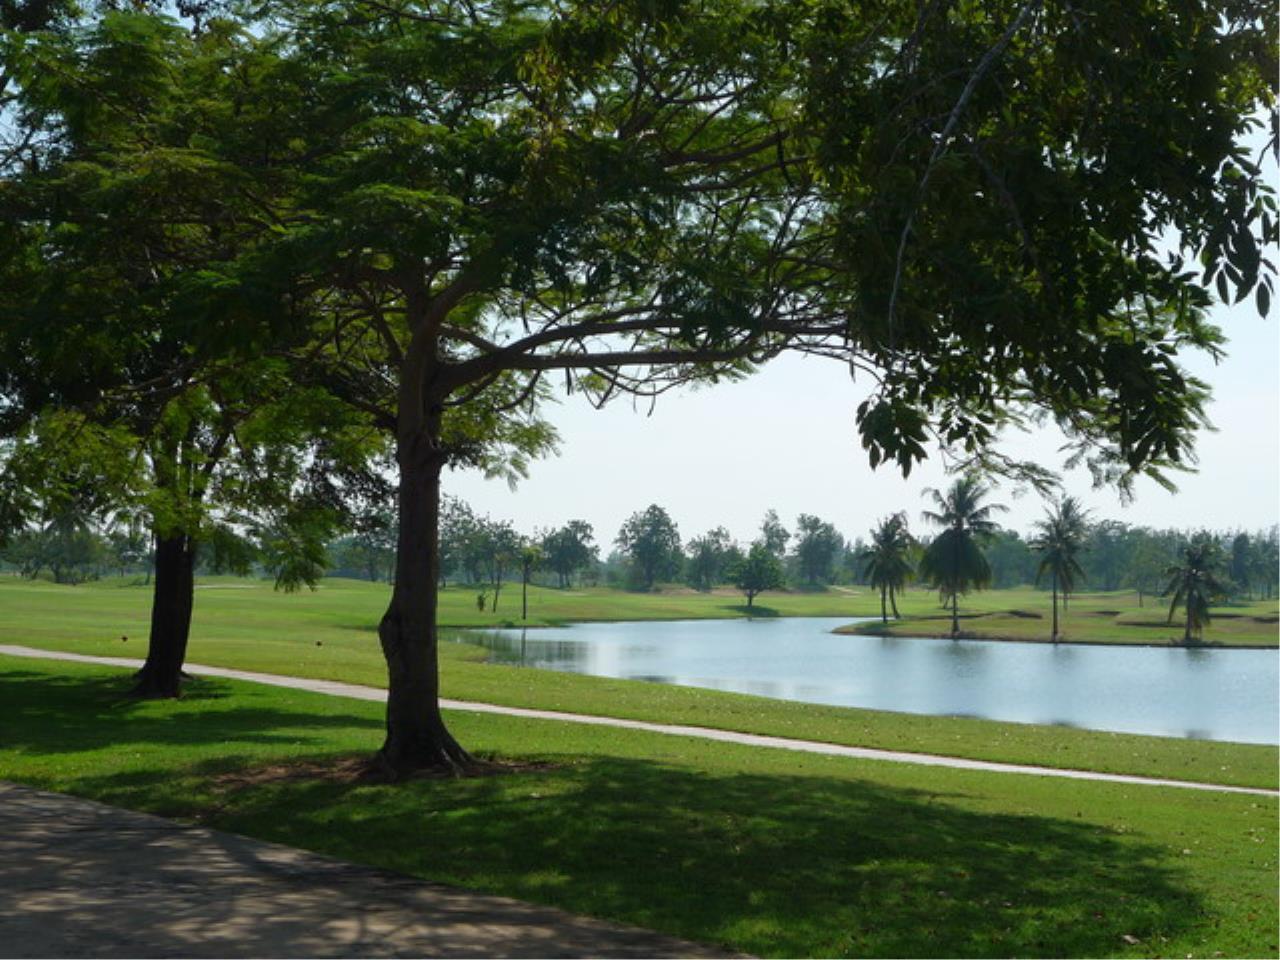 Forbest Properties Agency's 29565 - Banharn-Jamsai Road, Nakhon Pathom, Golf course for sale, area 513 acres 8